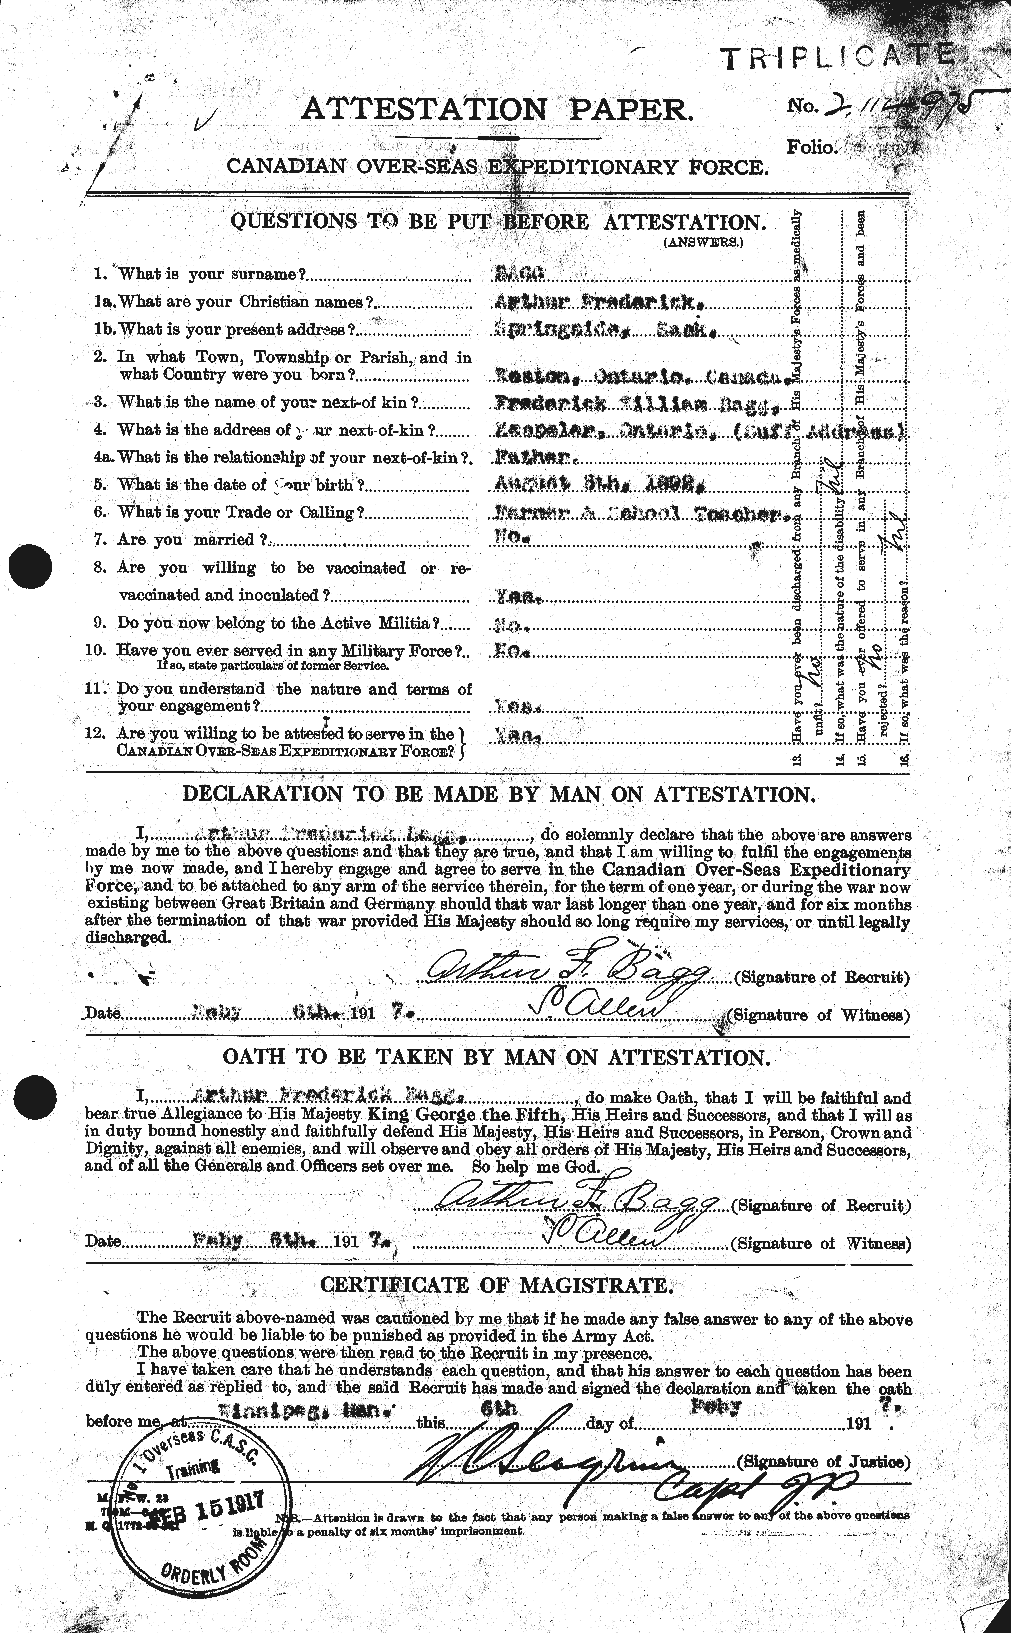 Personnel Records of the First World War - CEF 217641a